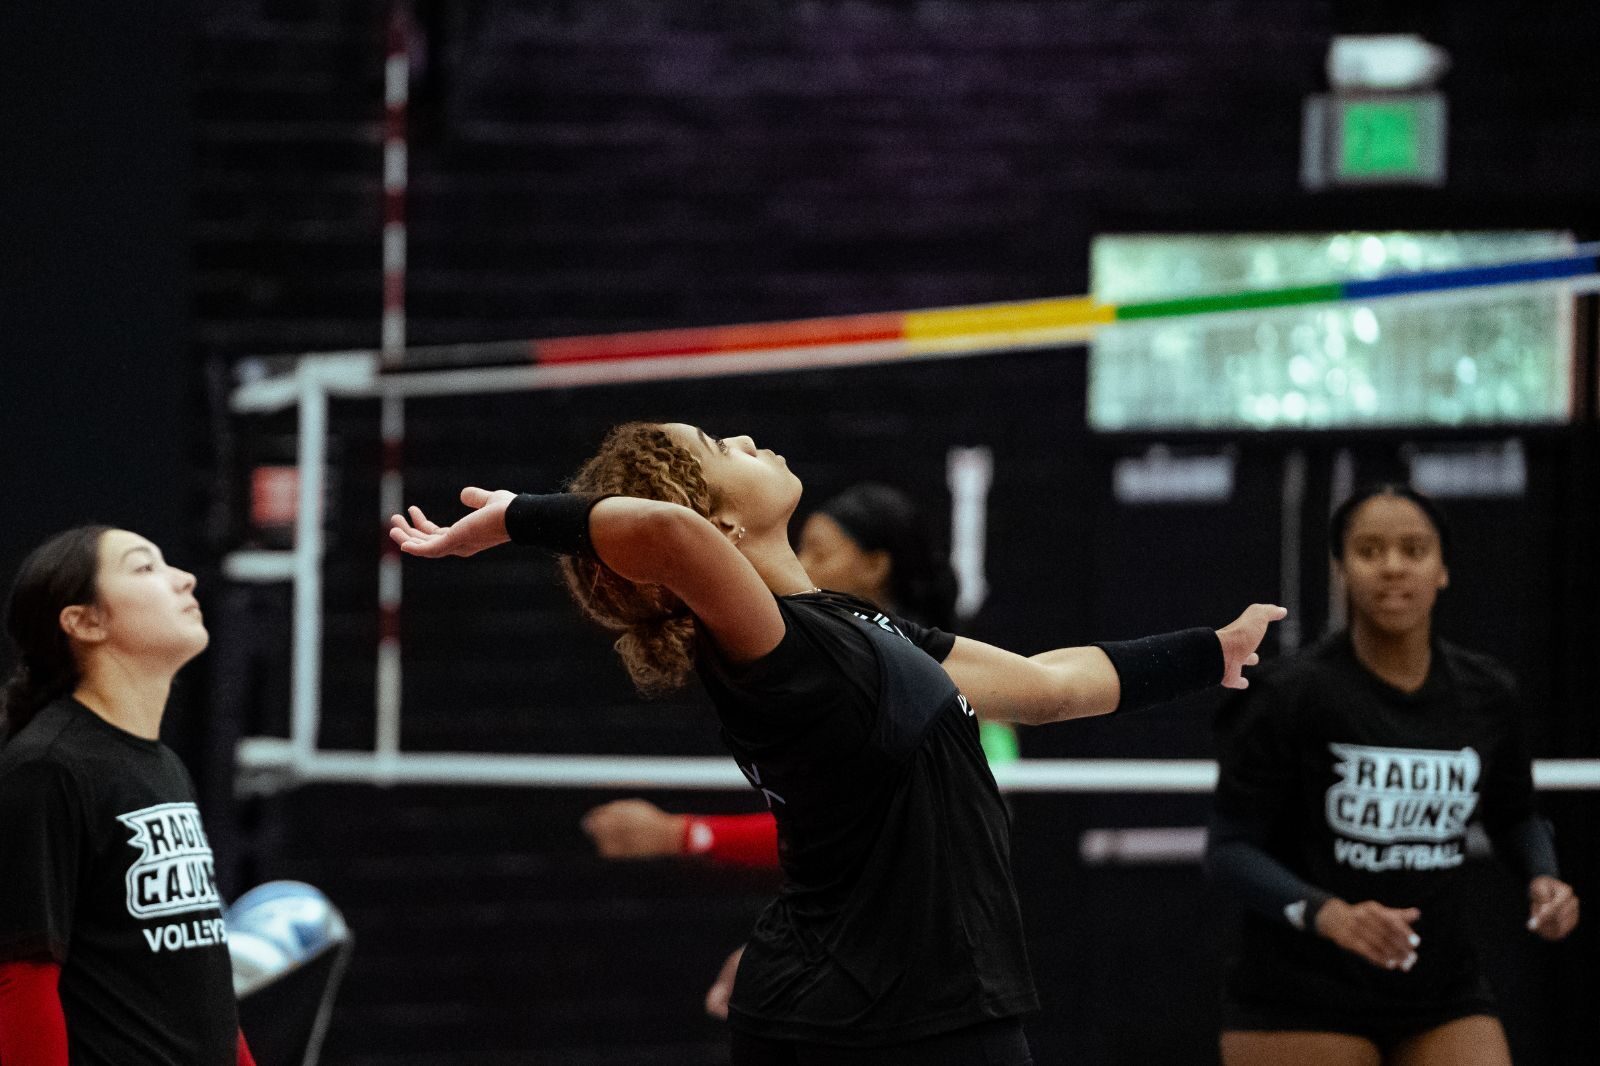 Sports performance software is used in volleyball to track things like jump height and load.